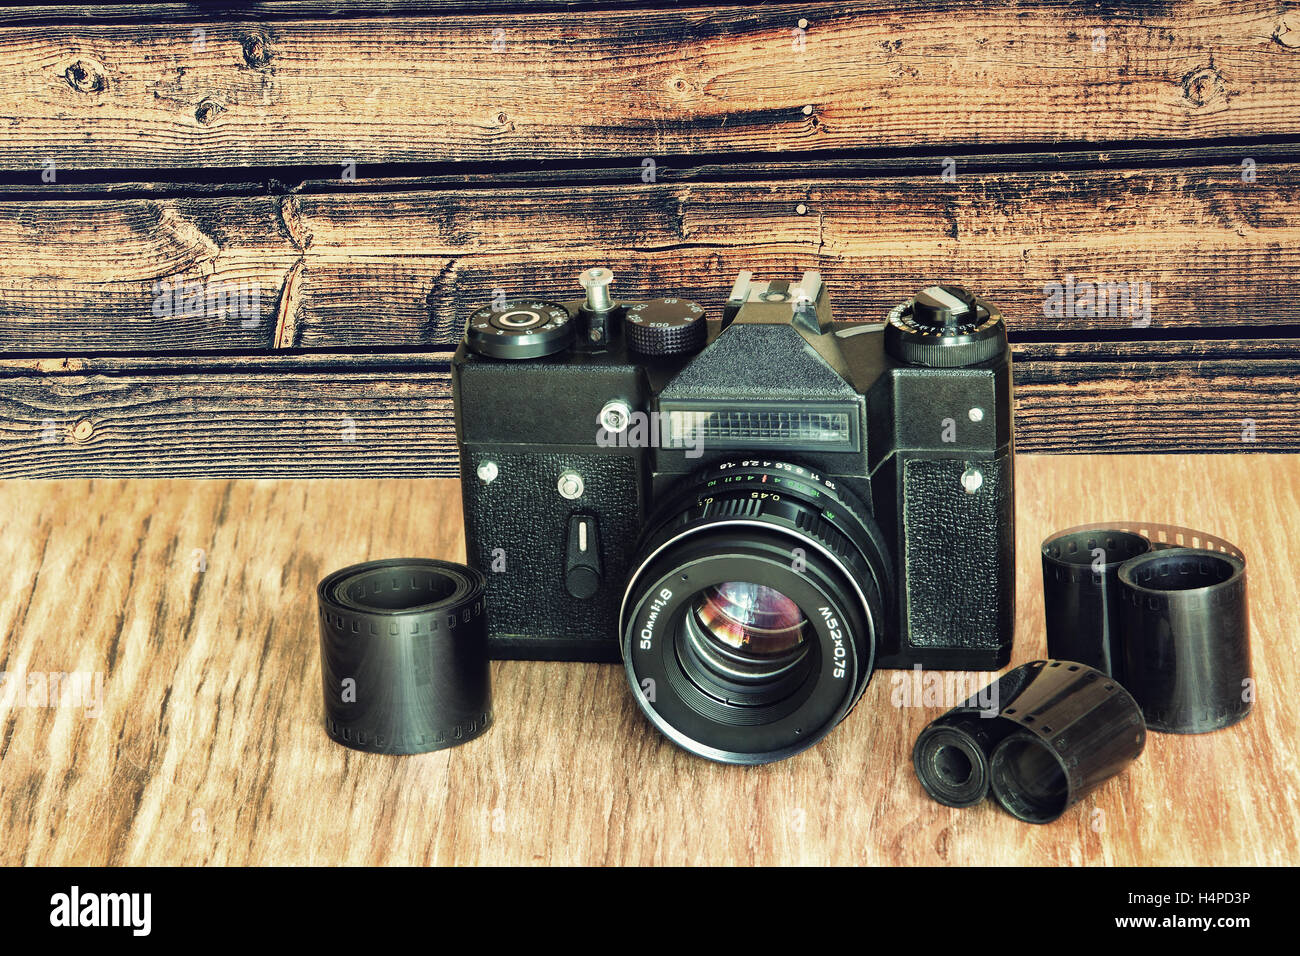 Old retro photo camera and film negative strip on wooden table against timber wall.Toned image. Stock Photo